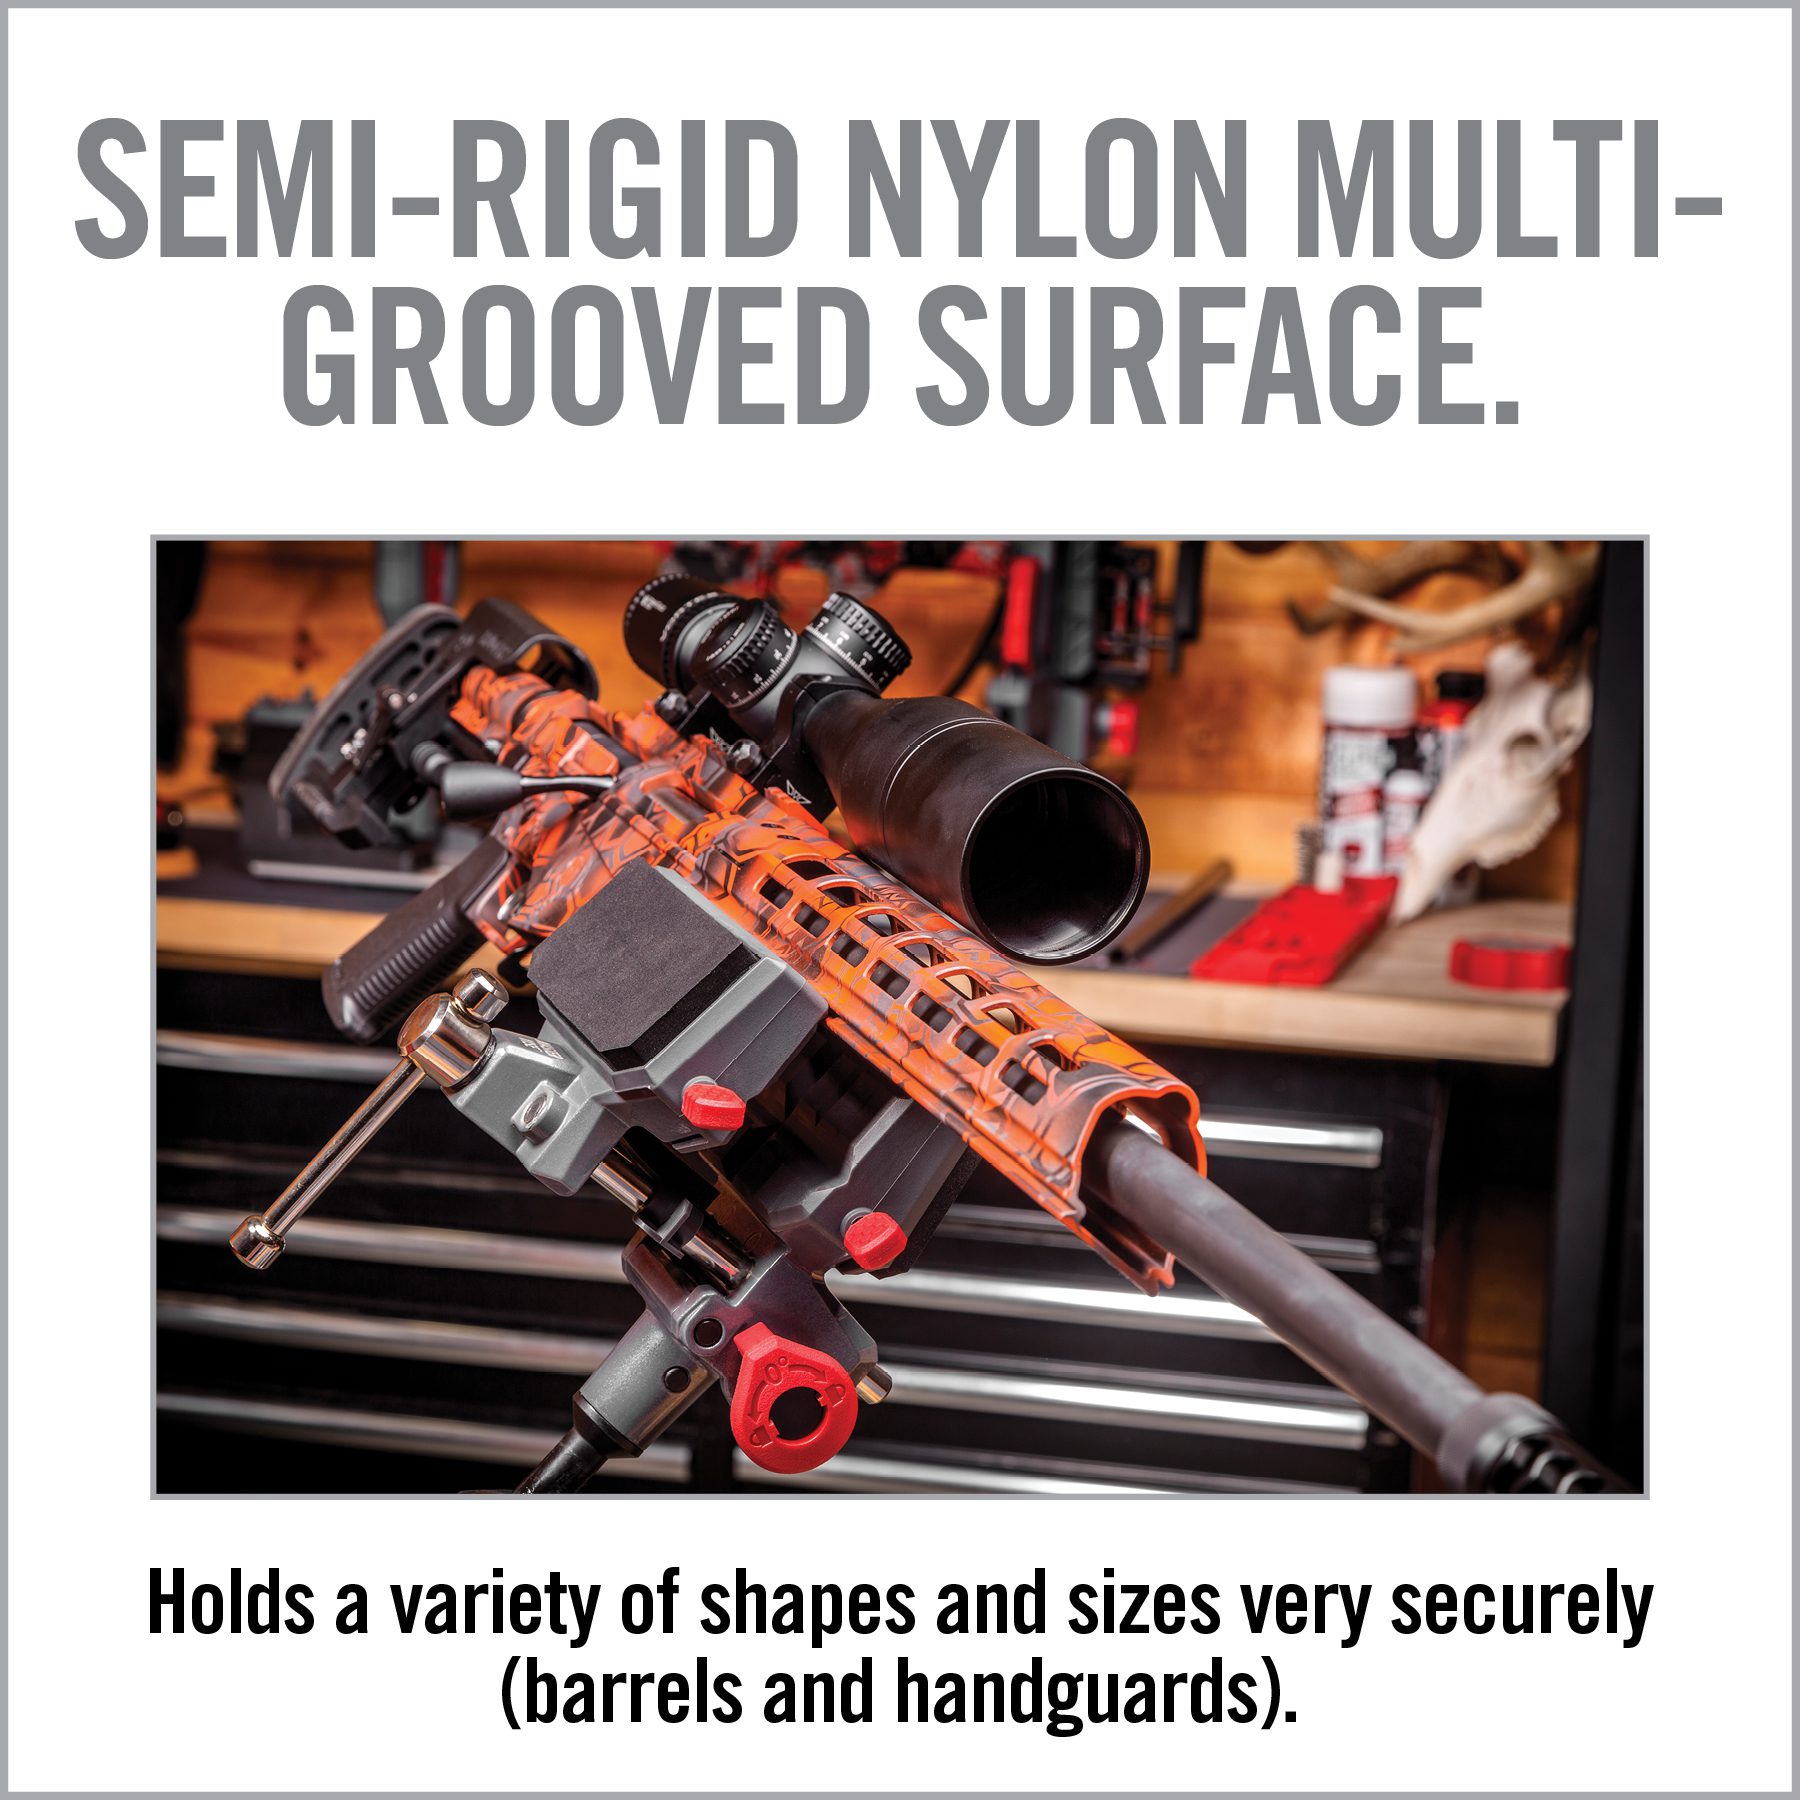 an advertisement for a gun shop with the words semi - rigd nylon multi - groveed surface